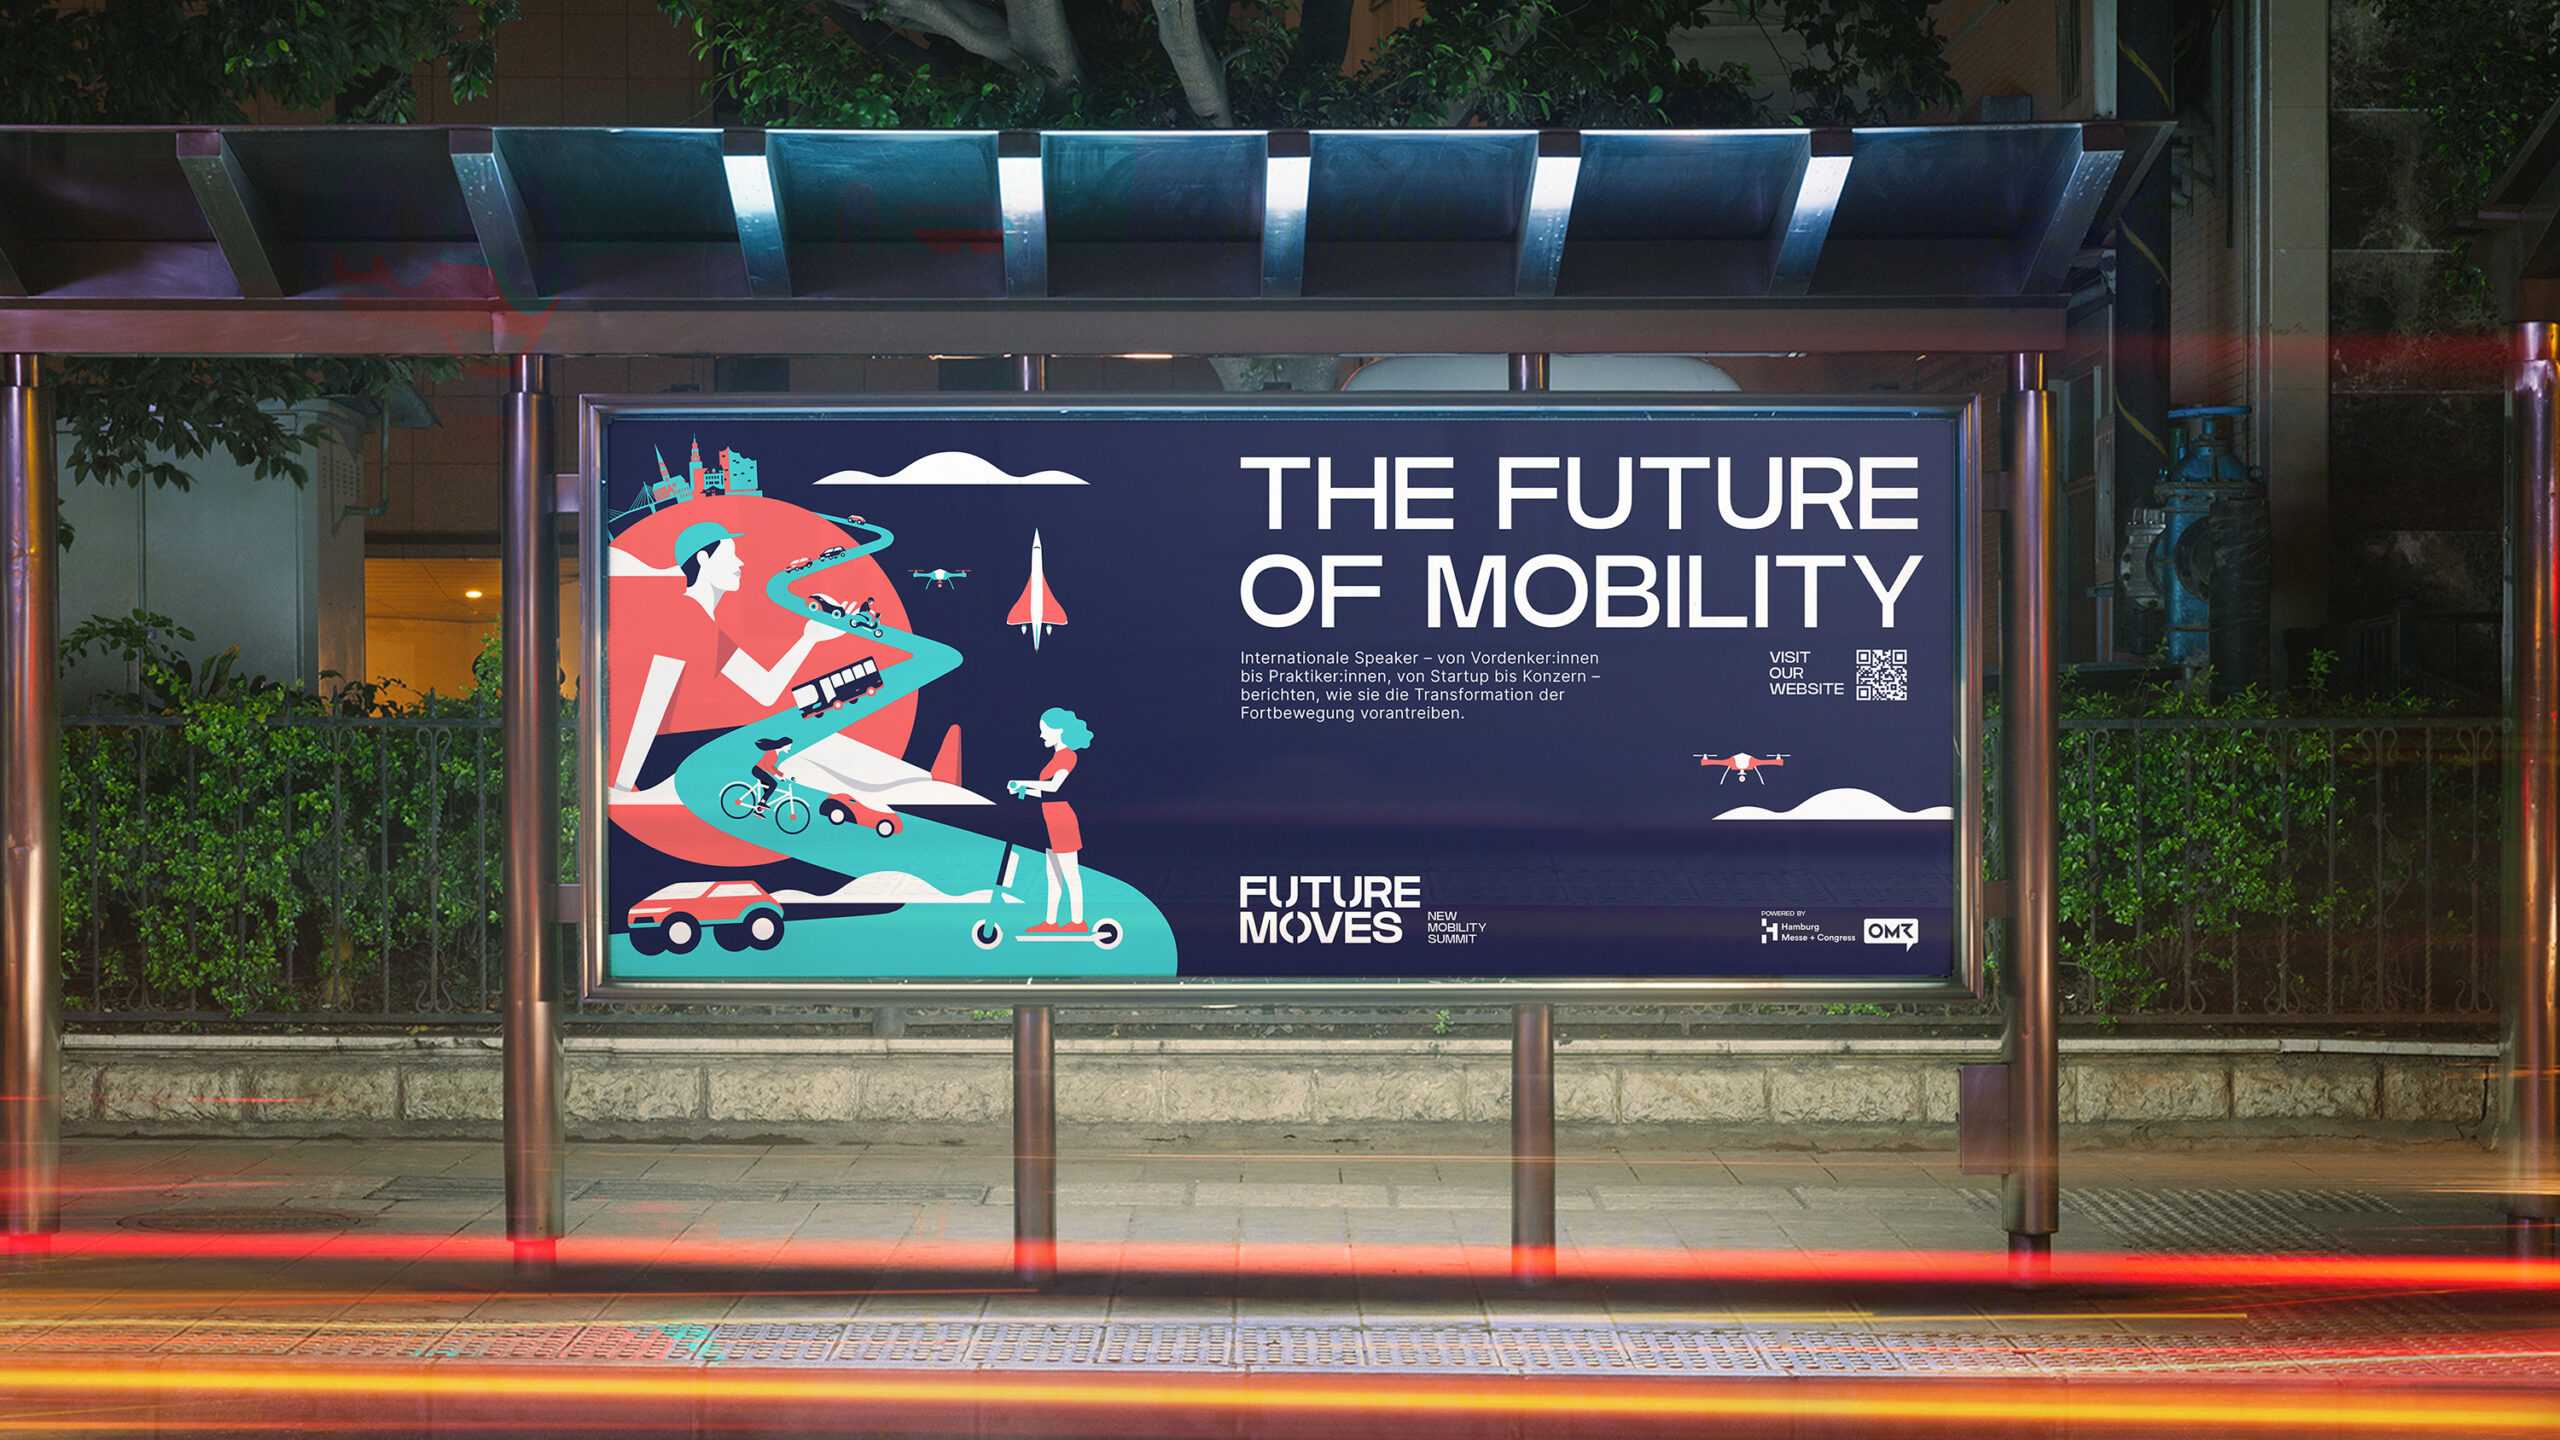 City light in visual identity of future moves with illustration